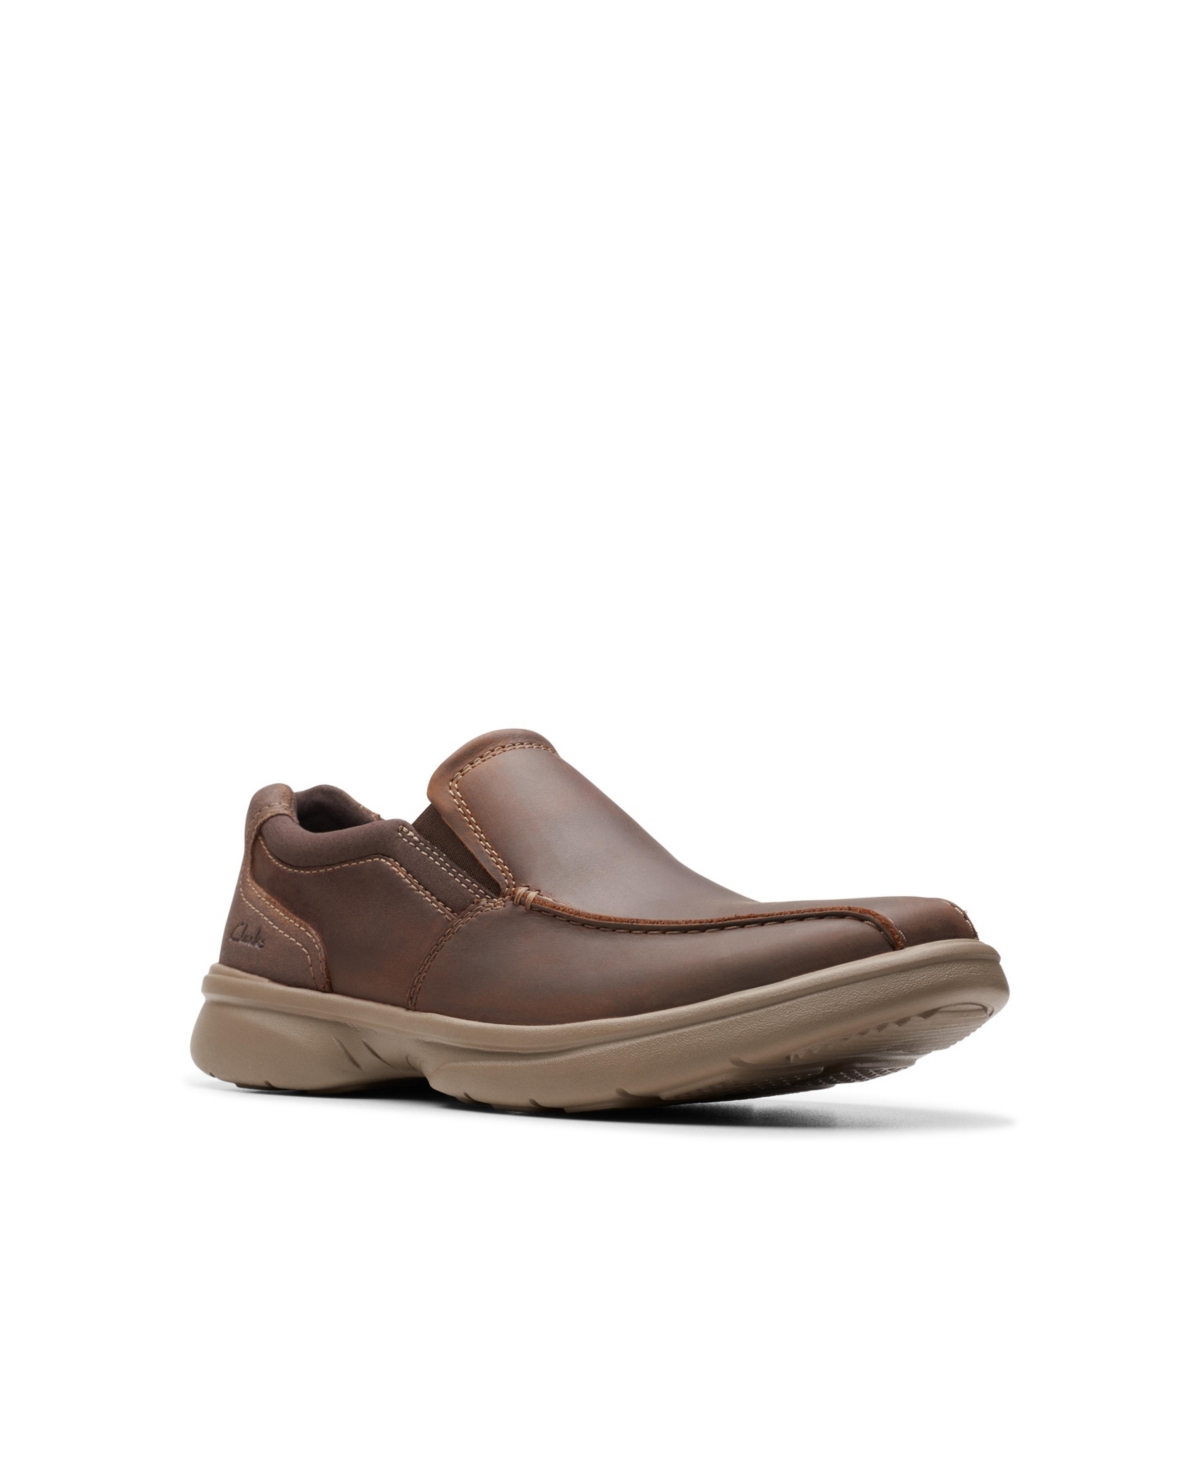 Men's Collection Bradley Step Slip On Shoes - Beeswax Leather